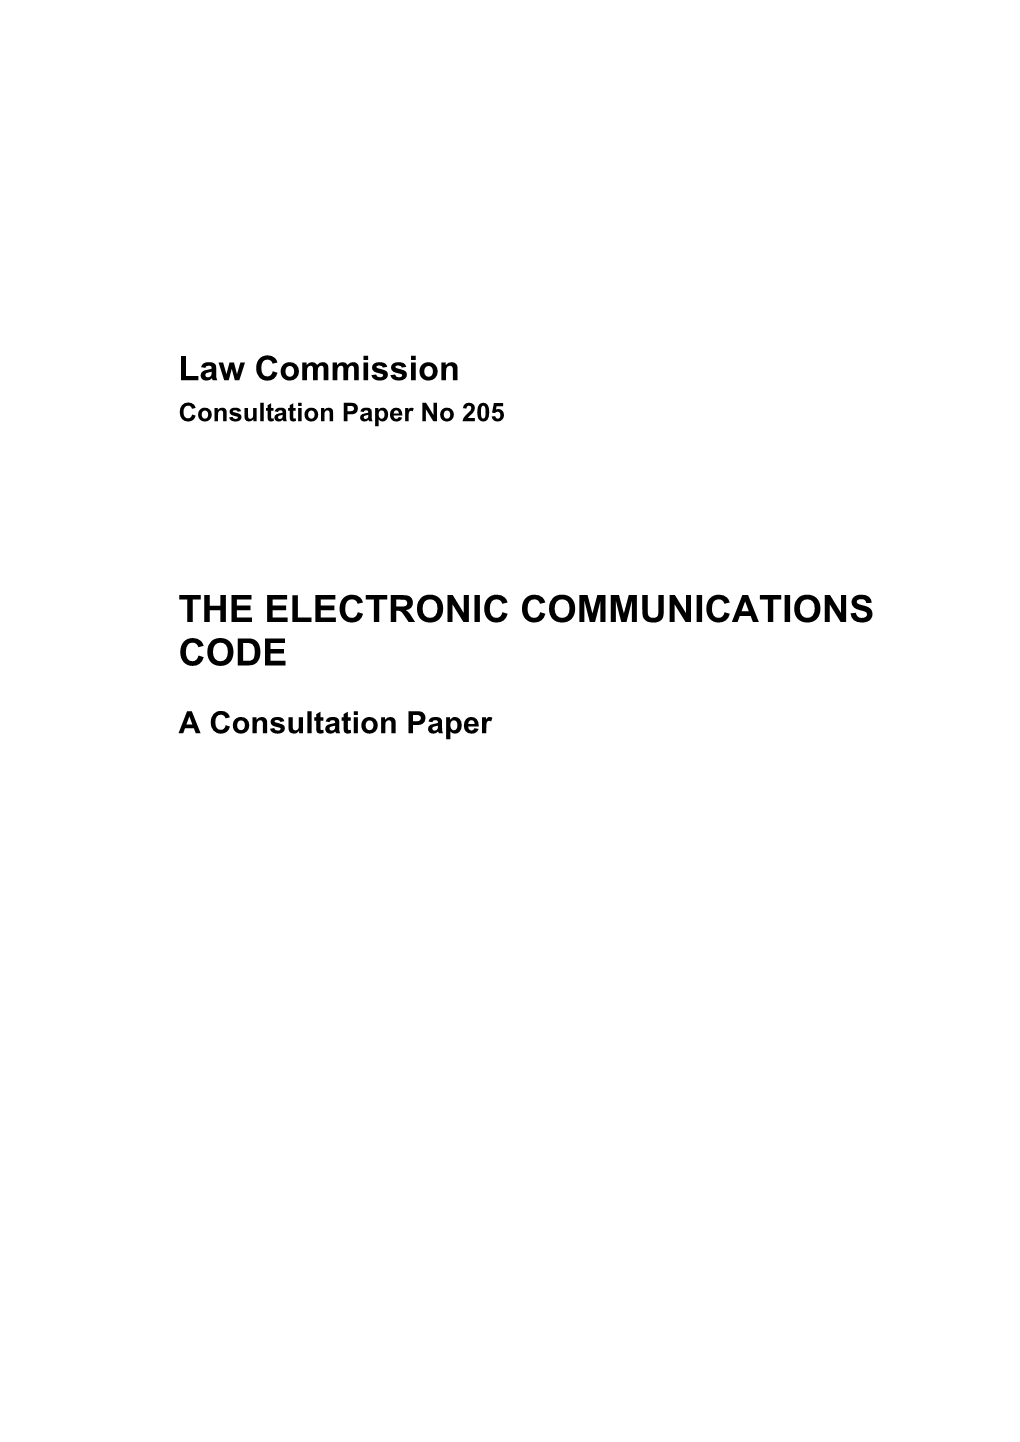 The Electronic Communications Code